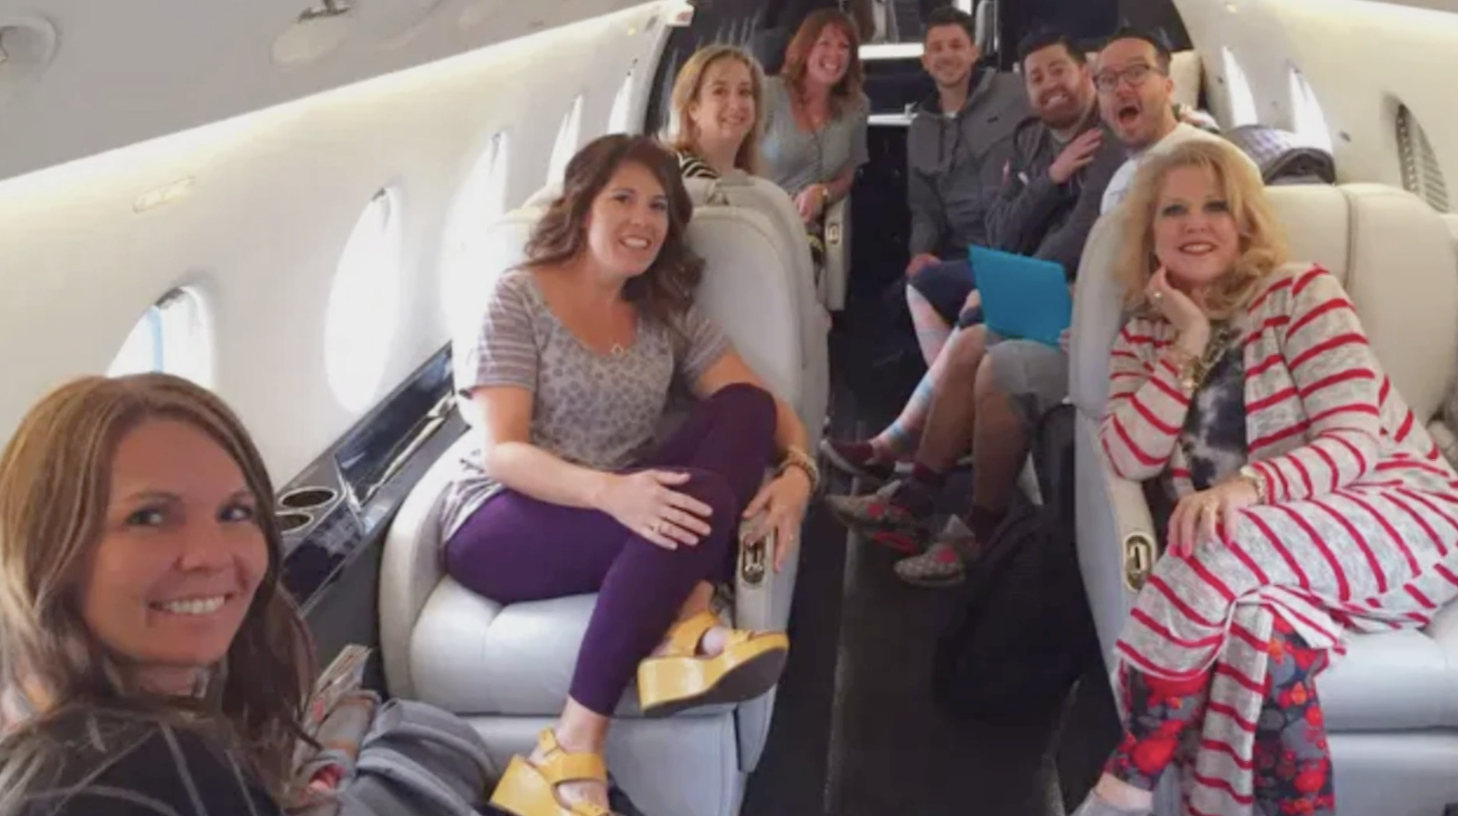 DeAnne with a group of her children/employees on a private jet